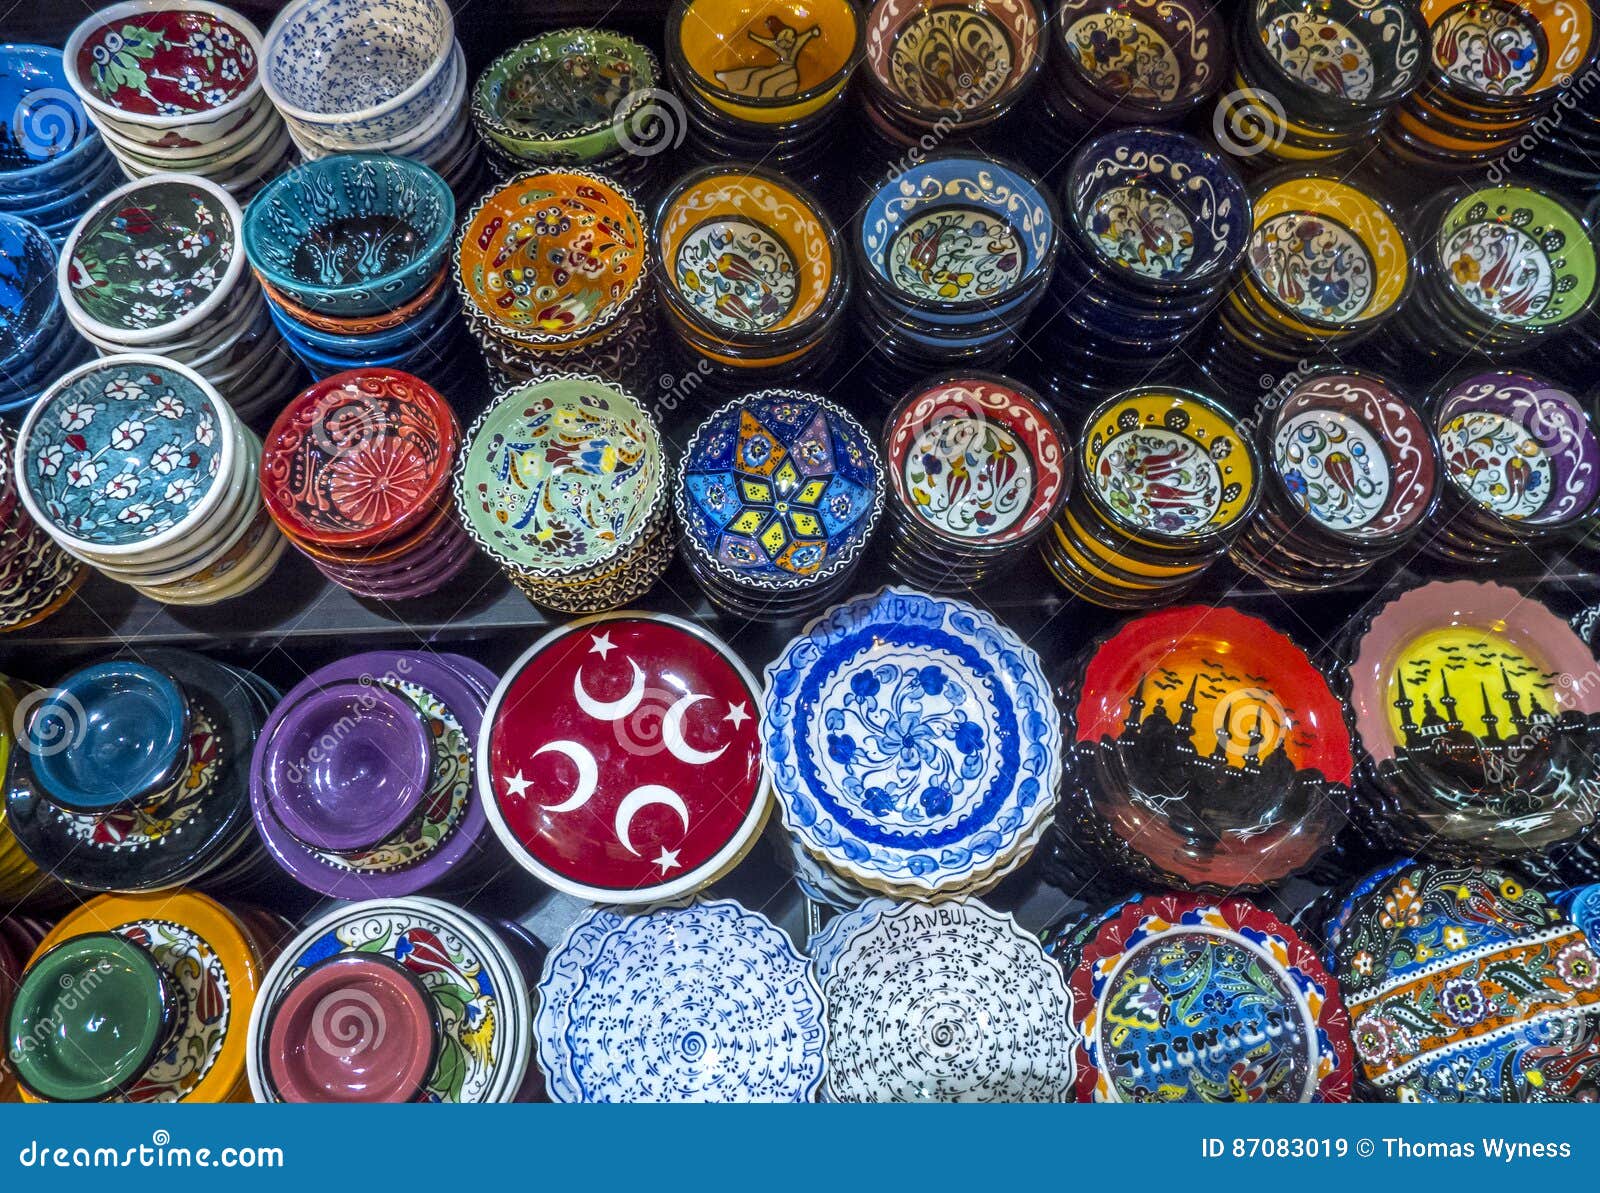 a colourful variety of plates and bowls on display at the spice bazaar in istanbul in turkey.